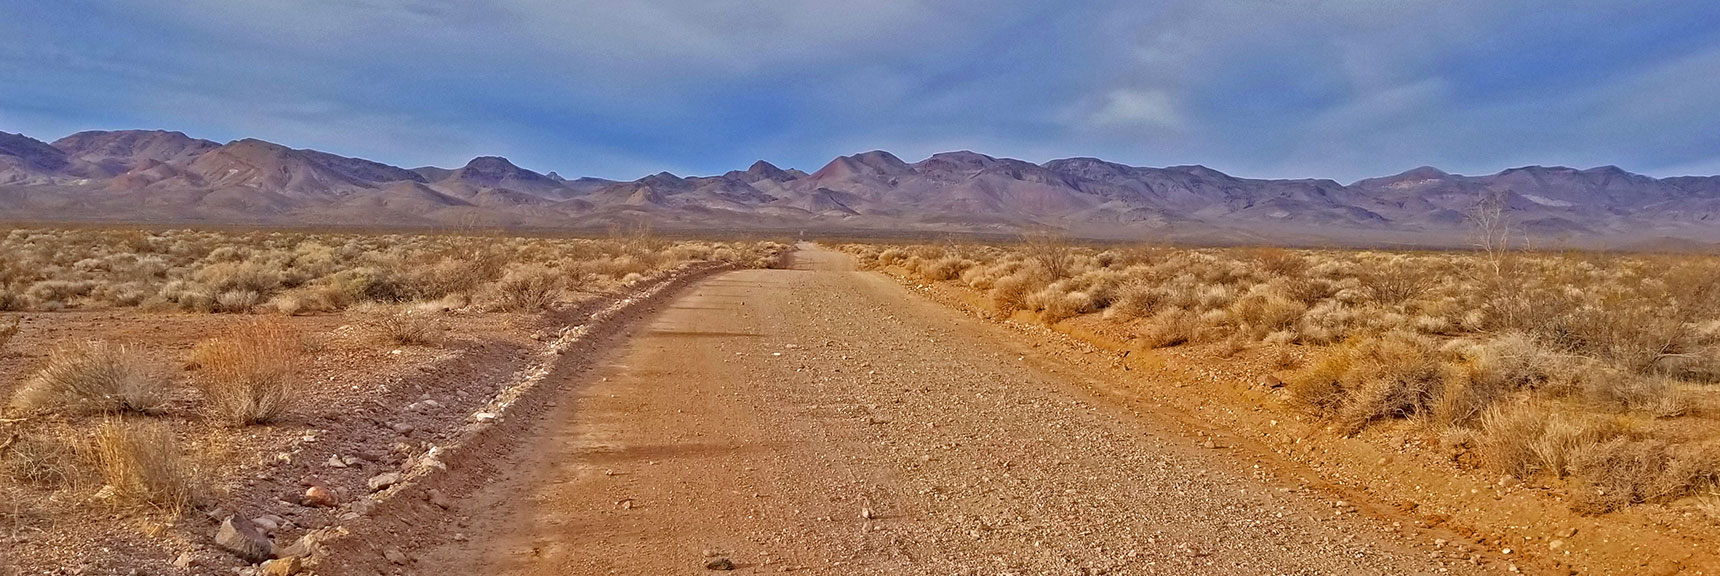 Heading Toward the Grapevine Mountains and Titus Canyon on Titus Canyon Road. | Titus Canyon Grand Loop by Mountain Bike | Death Valley National Park, California